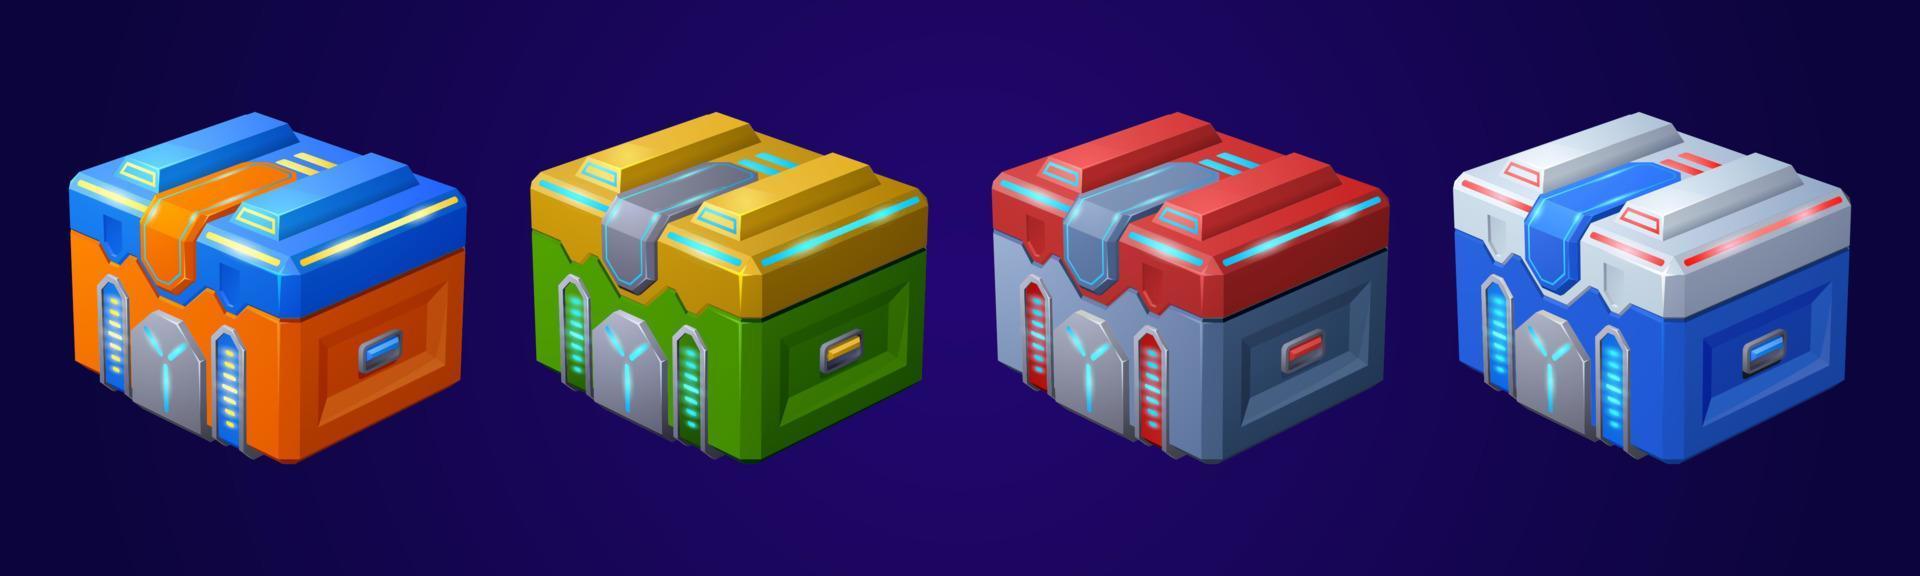 Game futuristic boxes, future technology chests vector